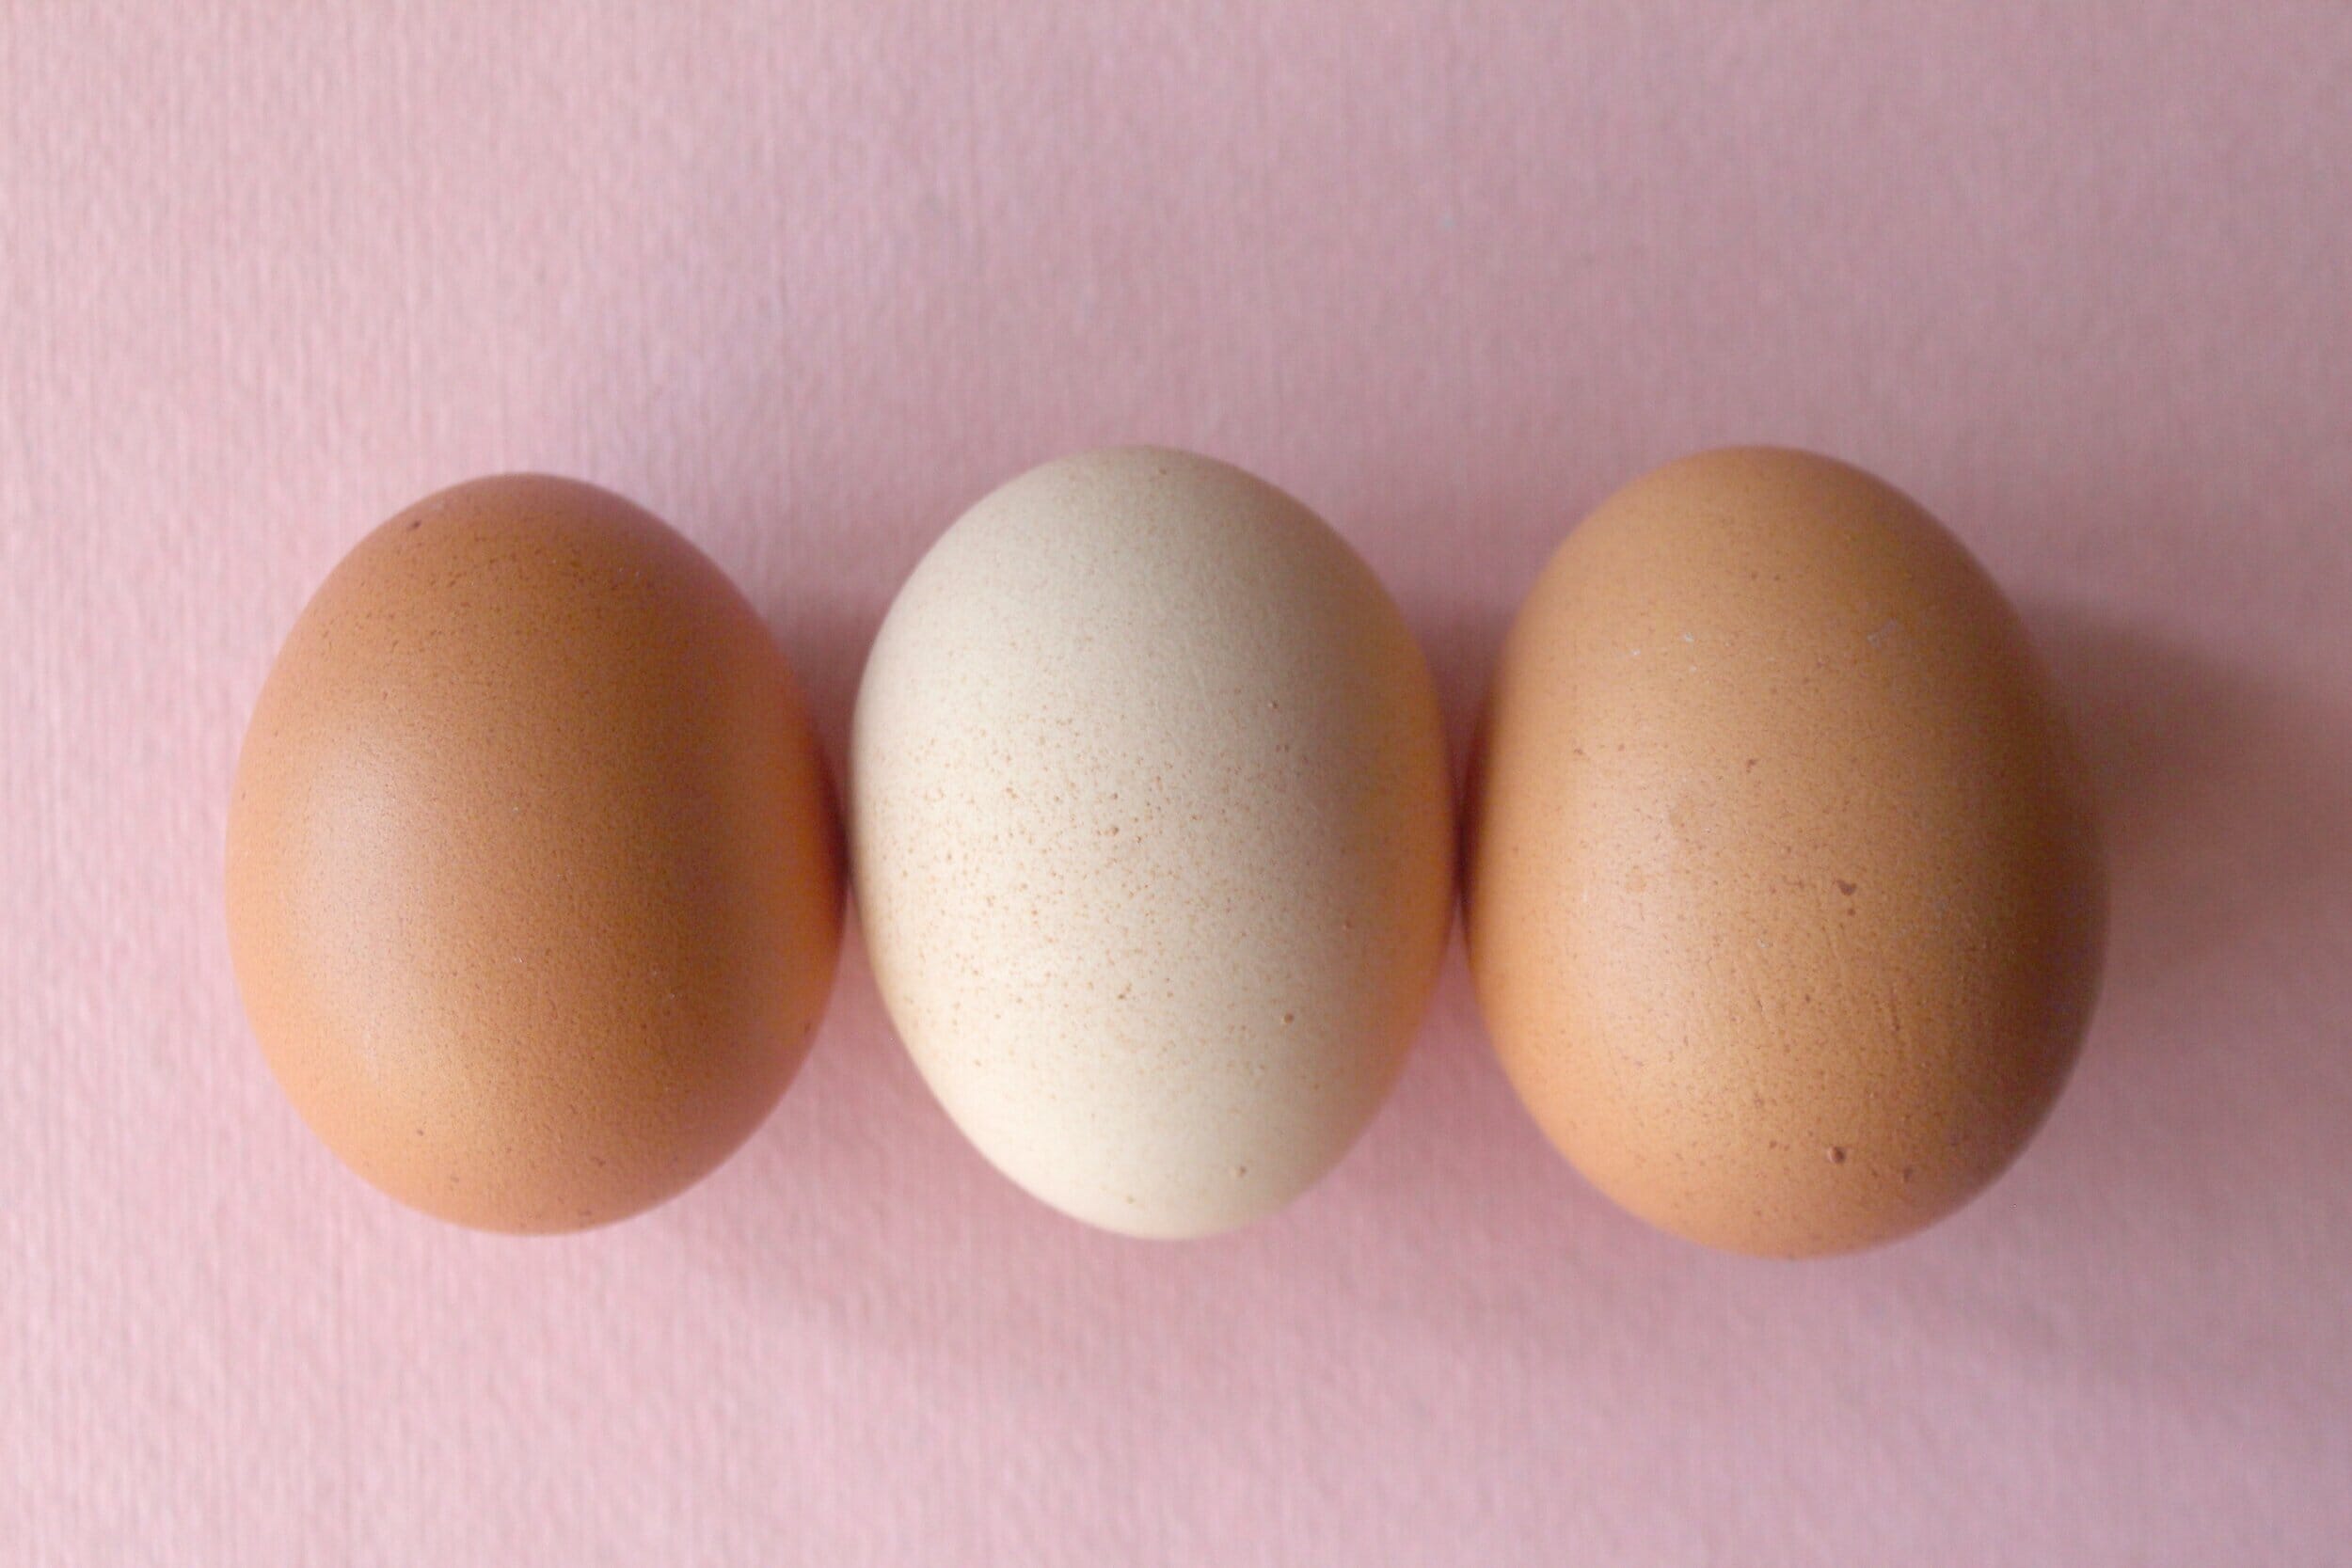 three eggs, two brown and one white